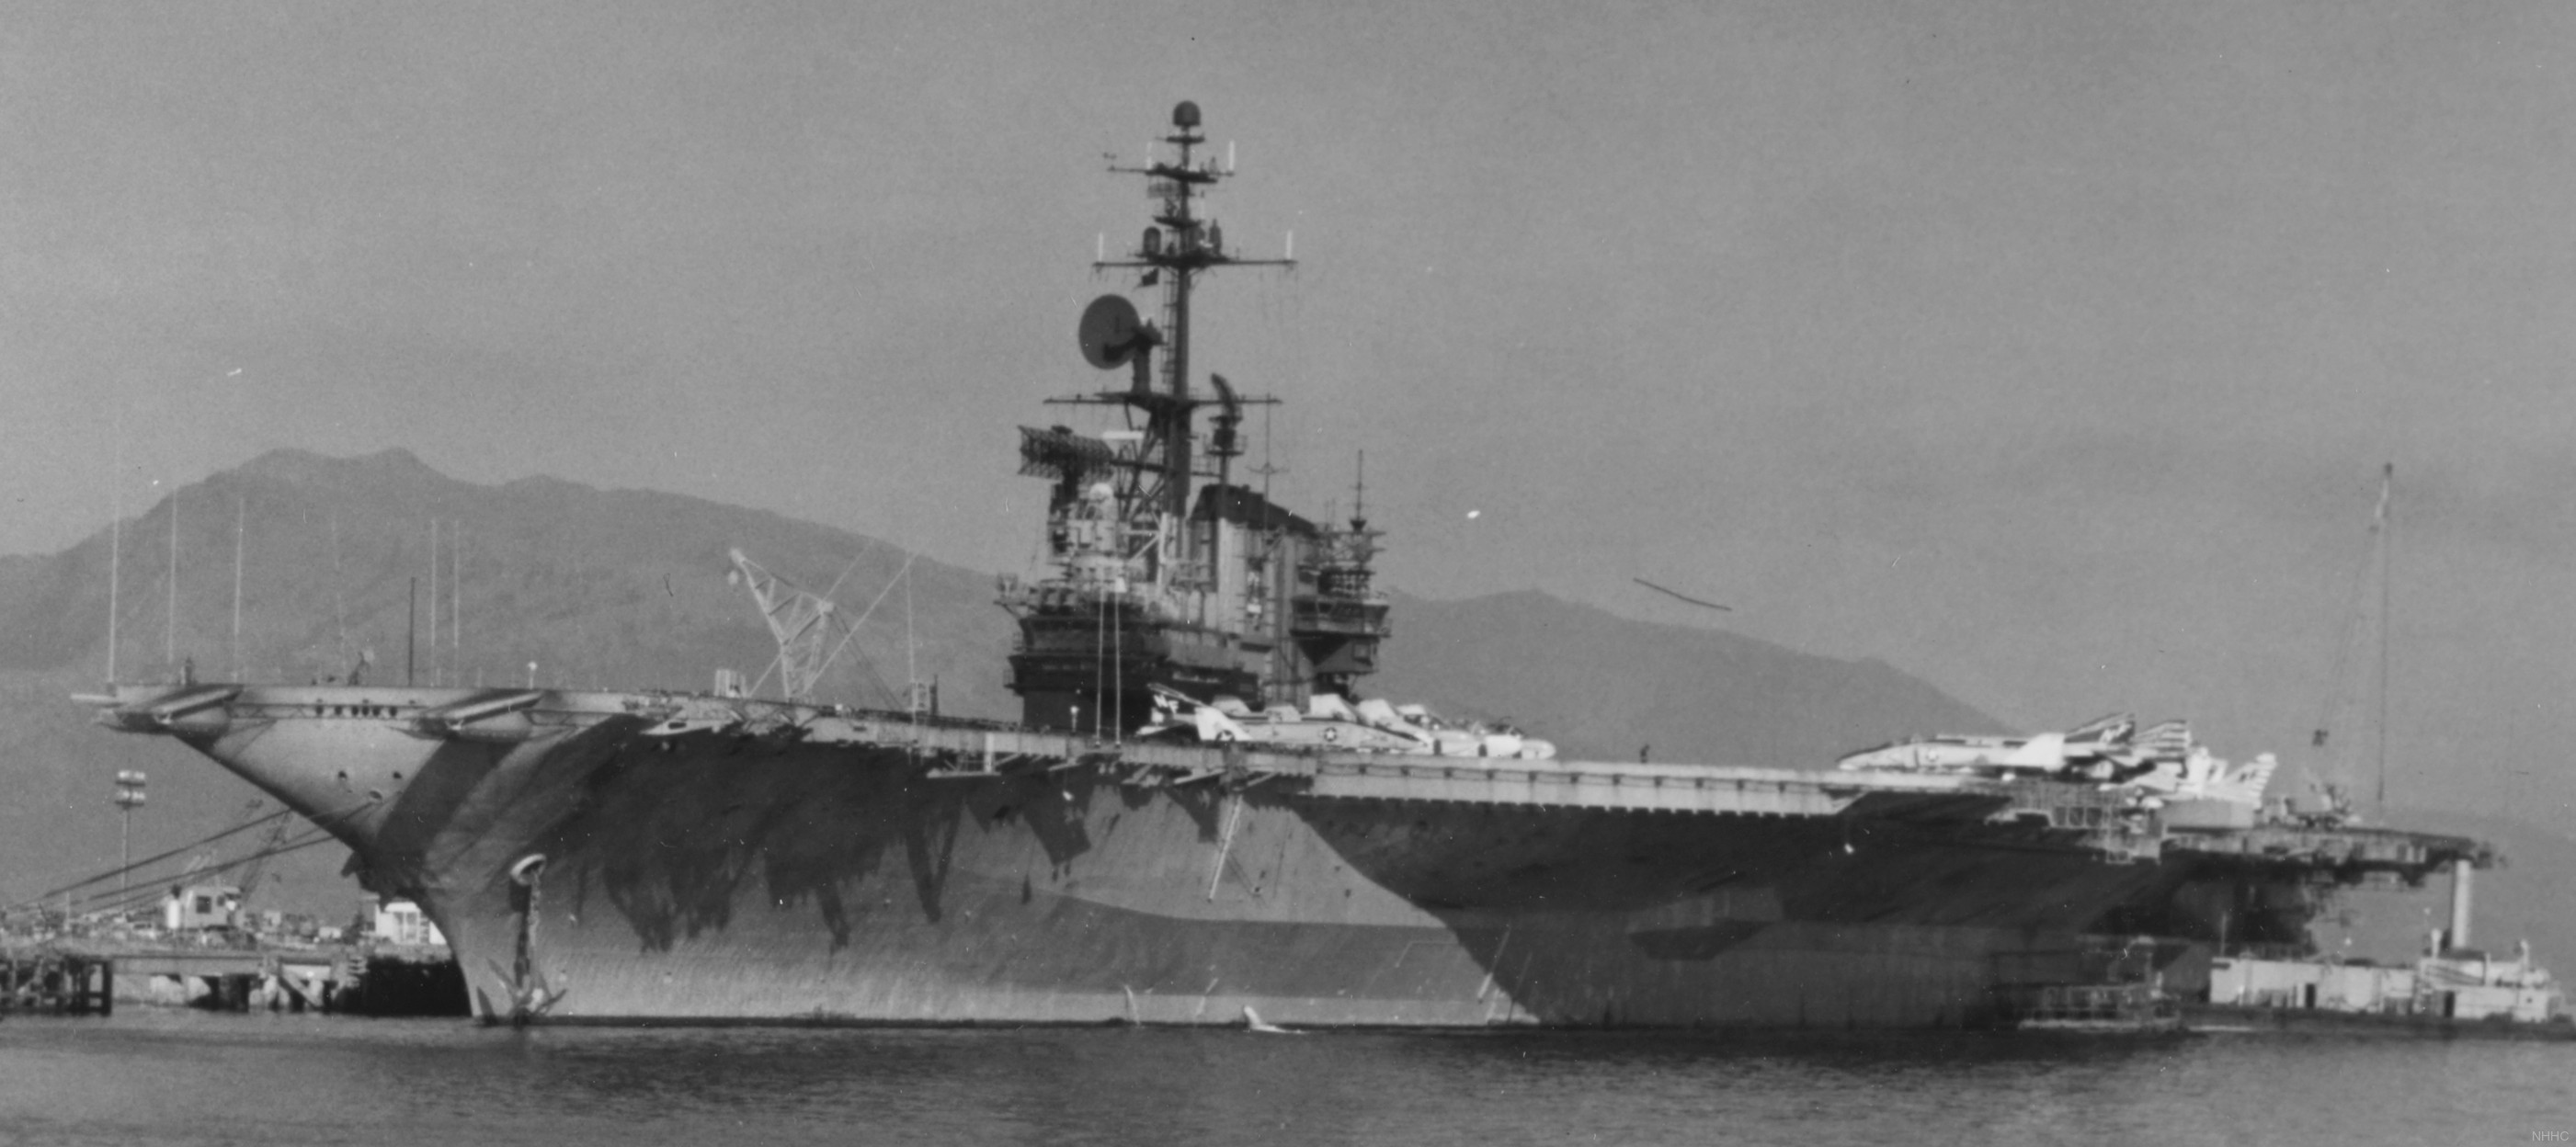 cv-41 uss midway aircraft carrier air wing cvw-5 us navy 112 subic bay philippines